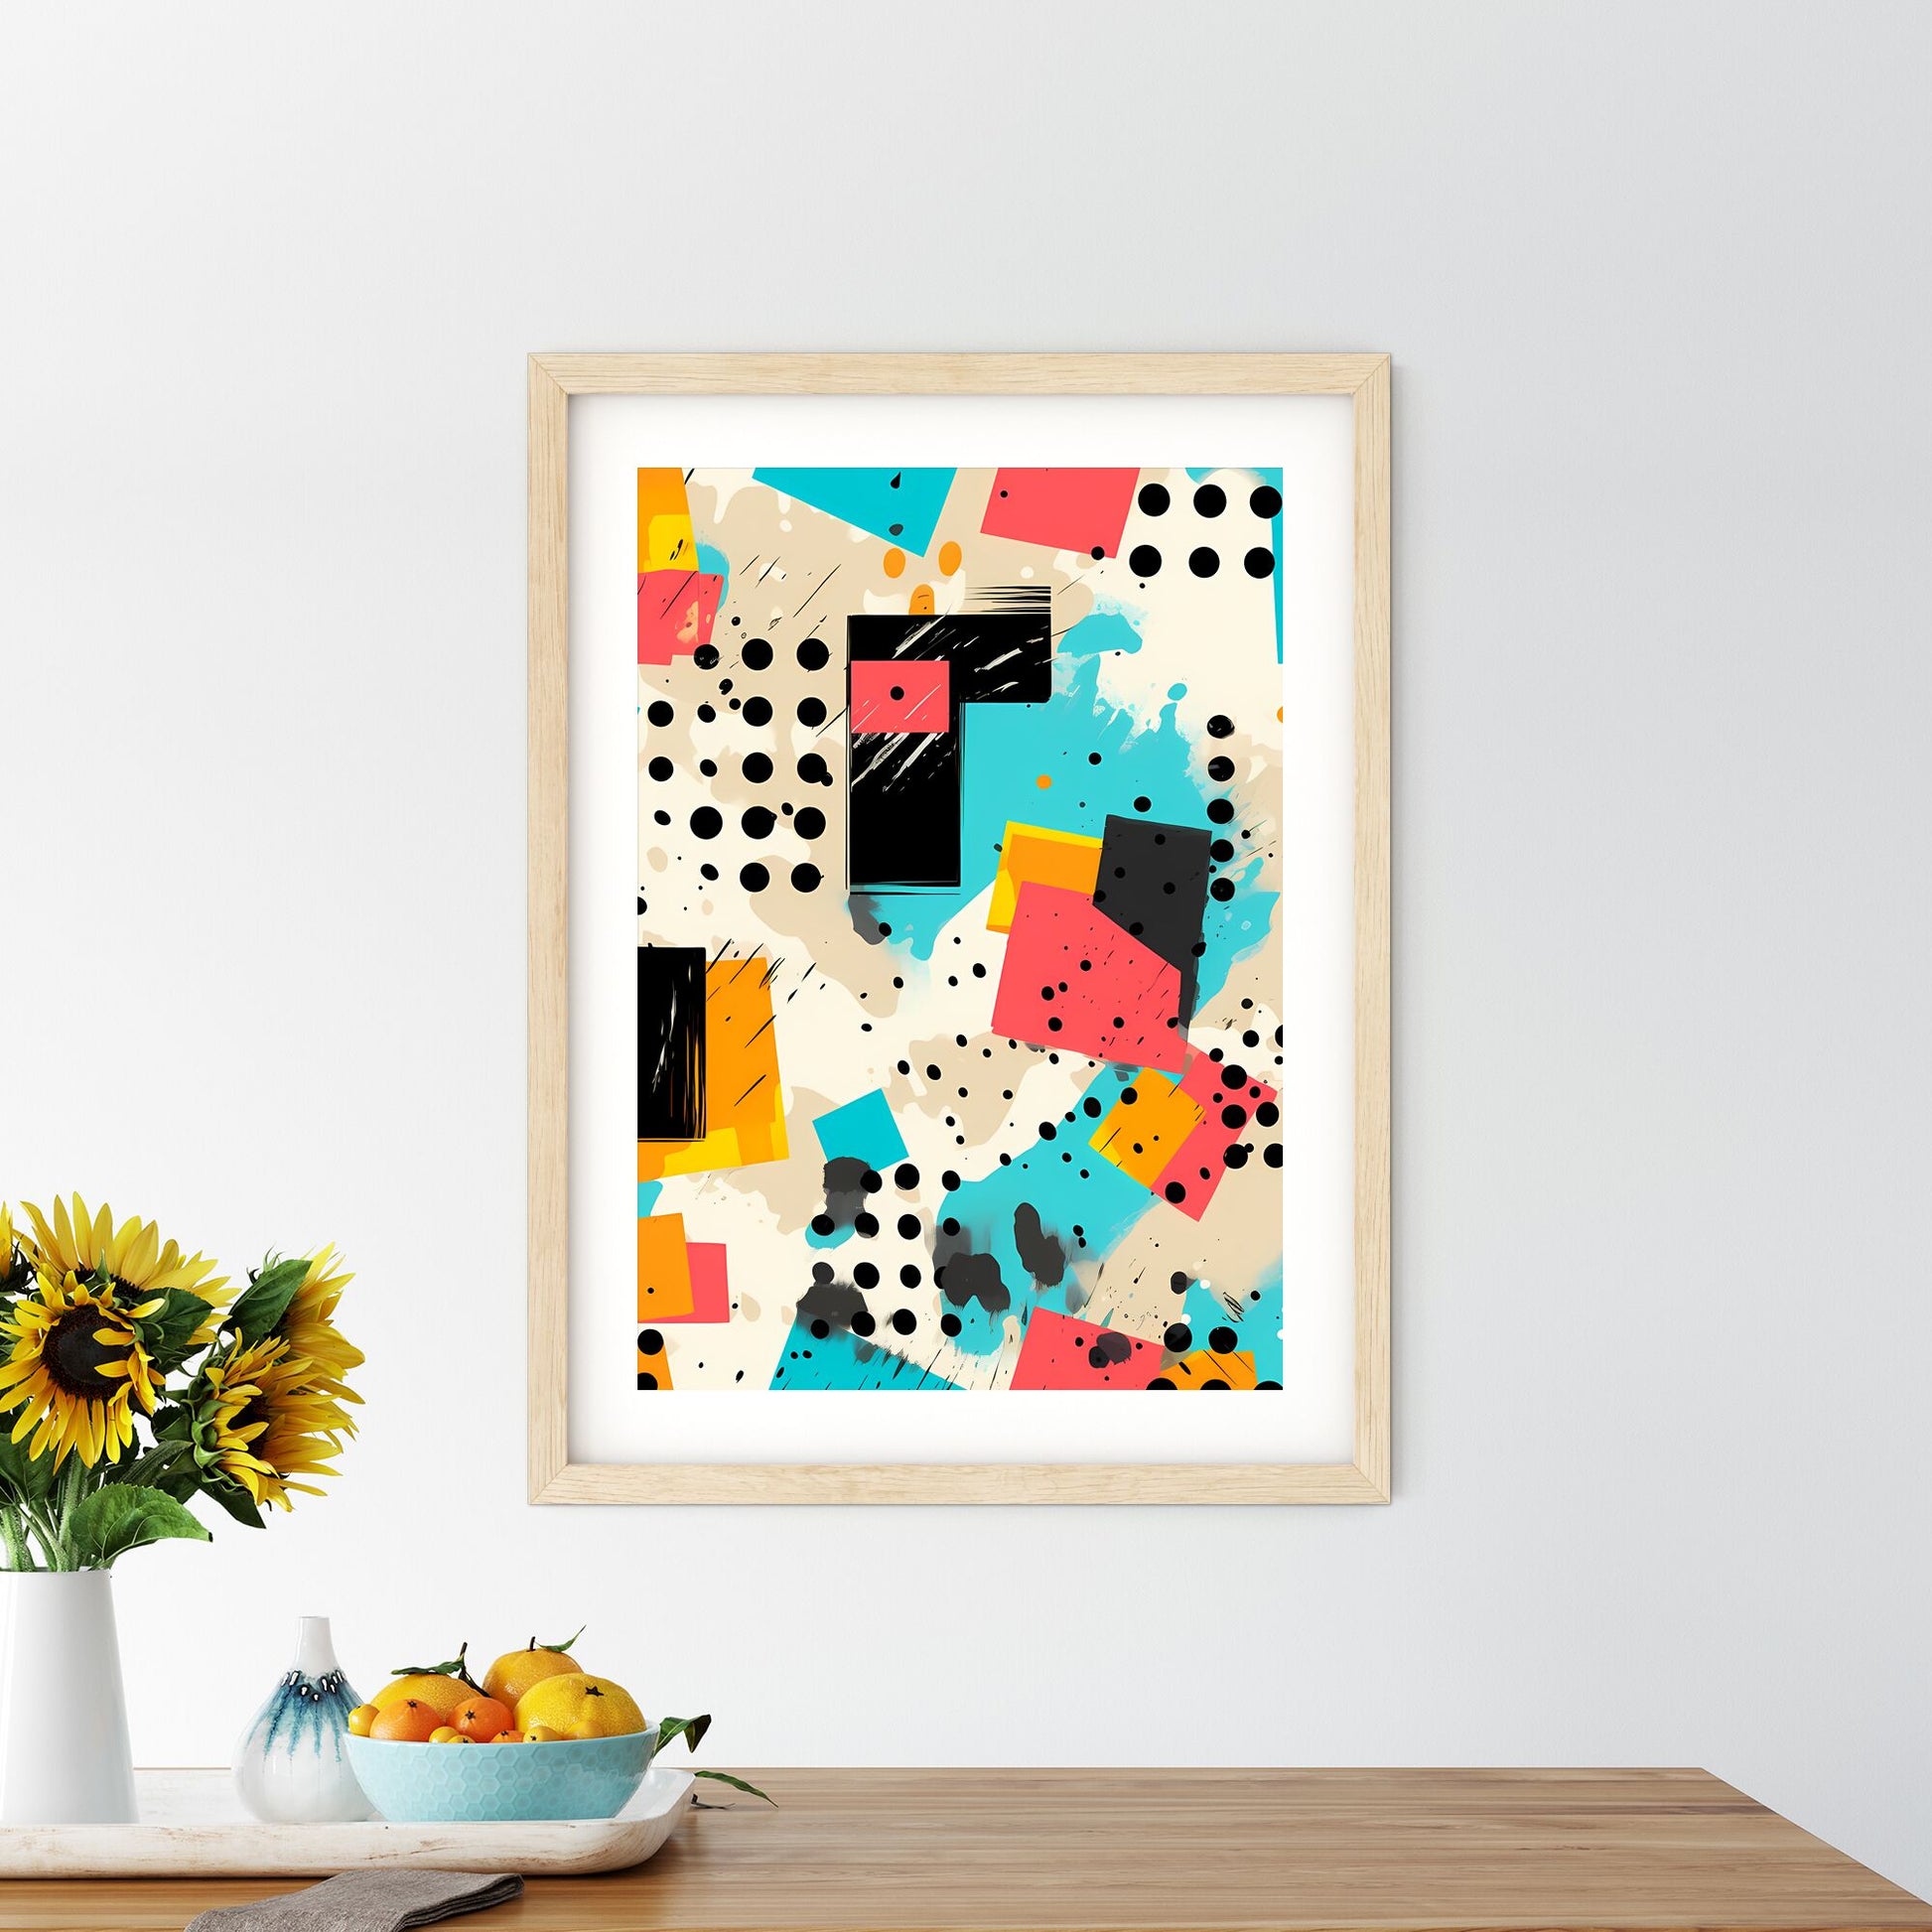 Colorful Pattern With Black Dots And Squares Art Print Default Title